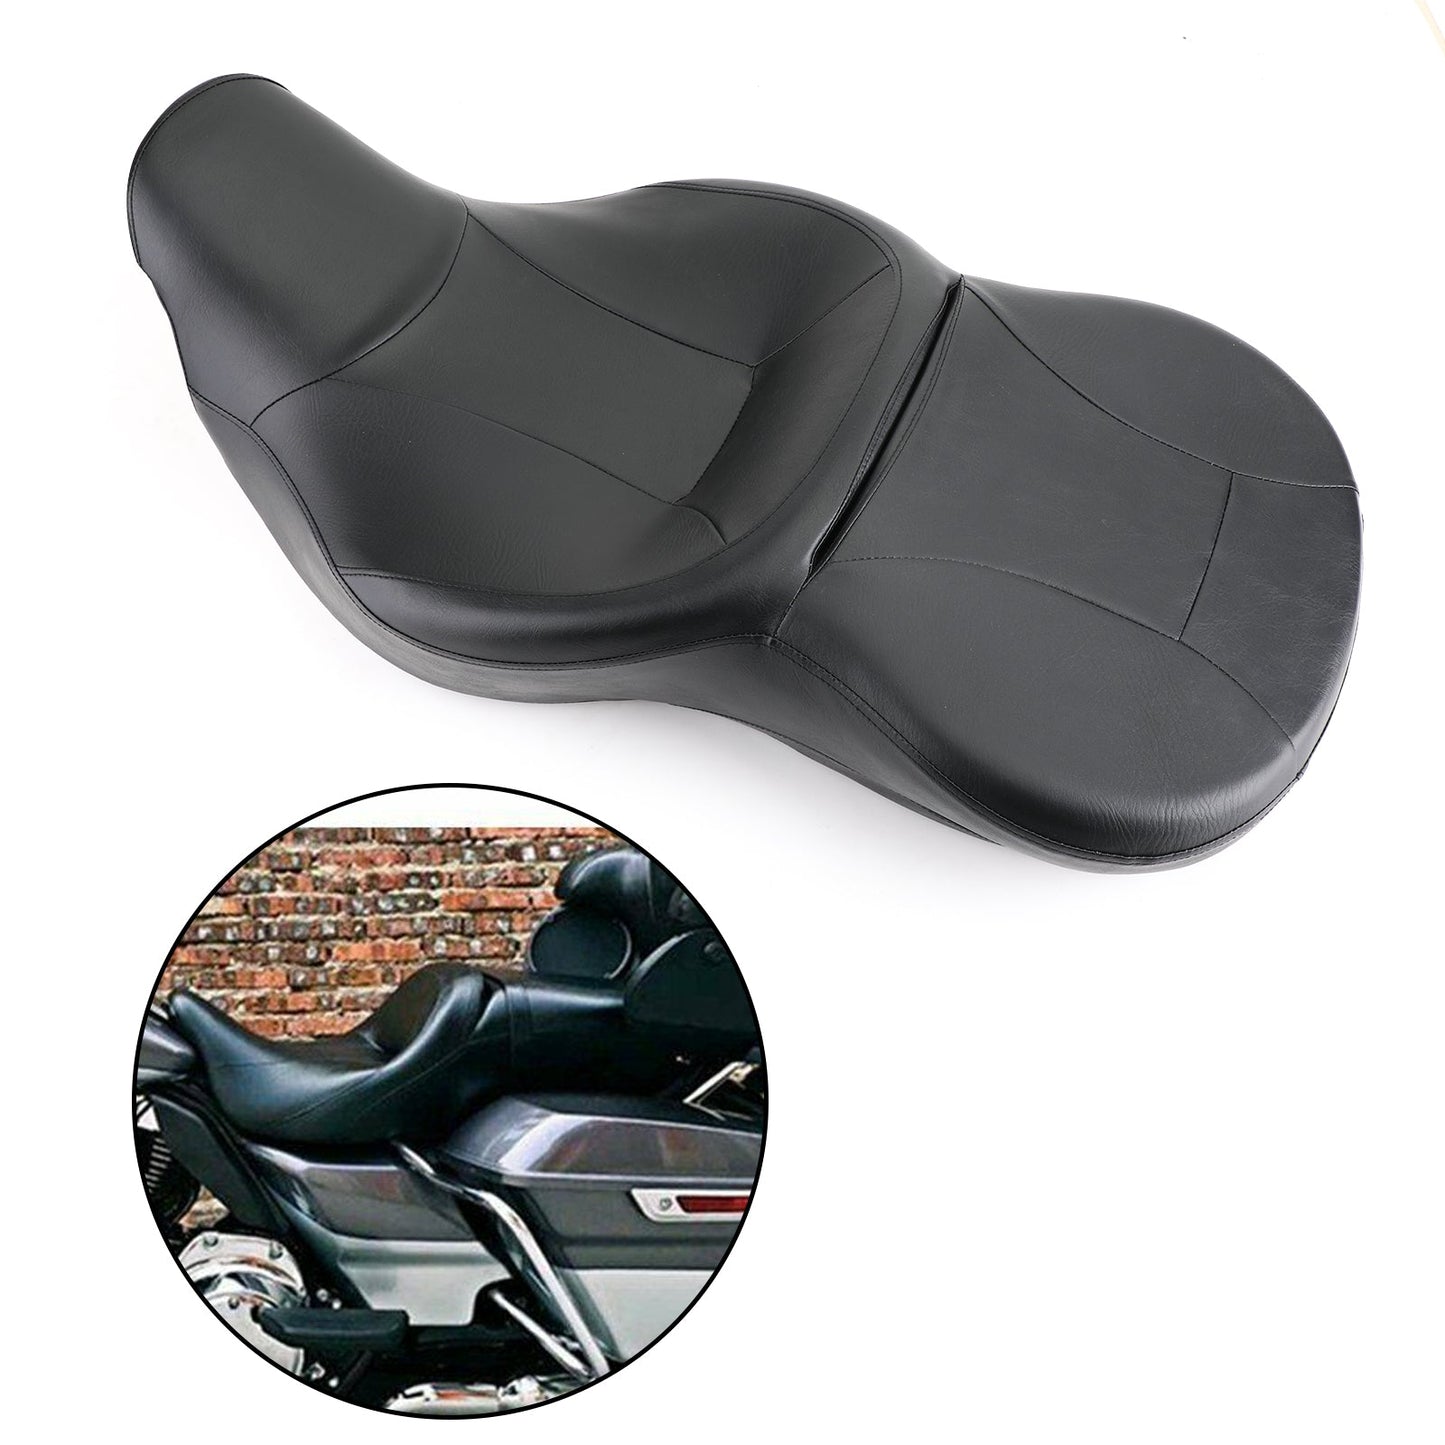 Rider and Passenger Seat Fit for Touring Street Electra Glide Road King 09-21